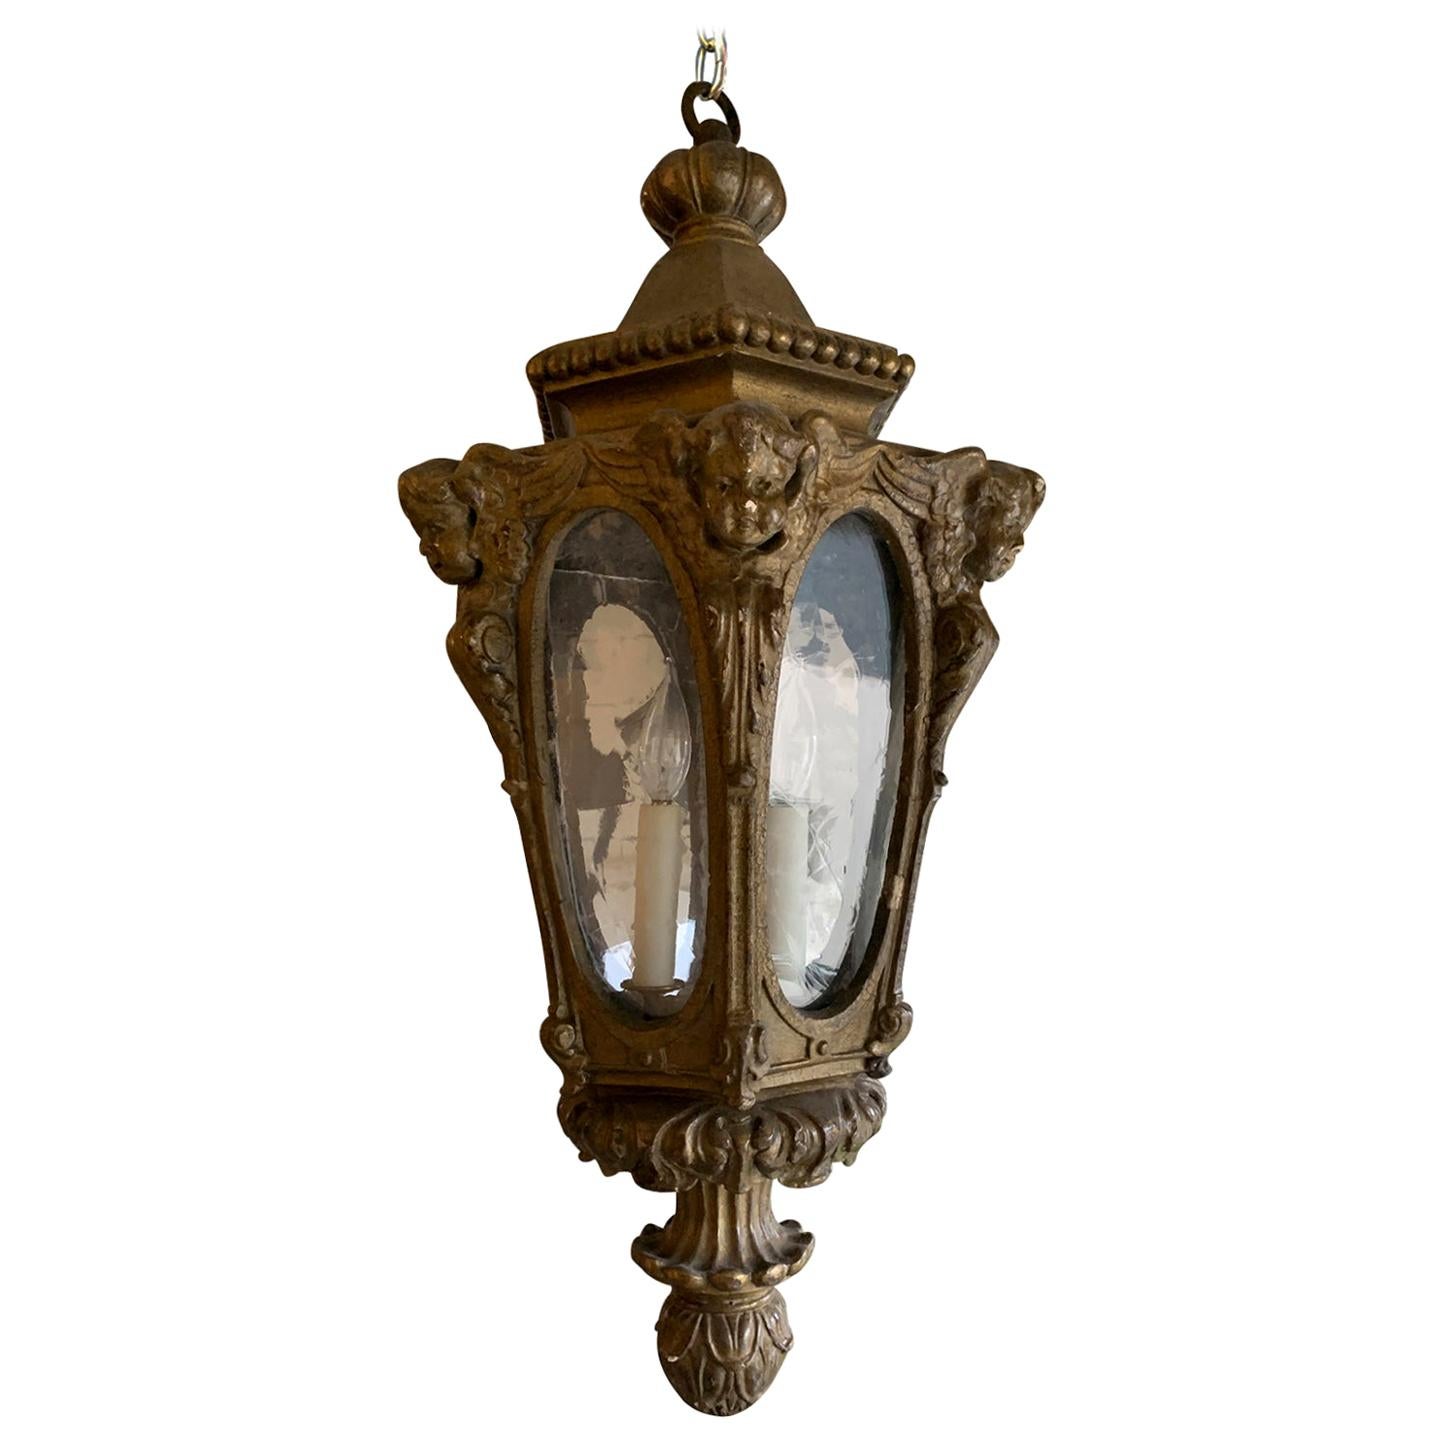 19th-20th Century Italian Carved Giltwood Lantern with Cherubs For Sale